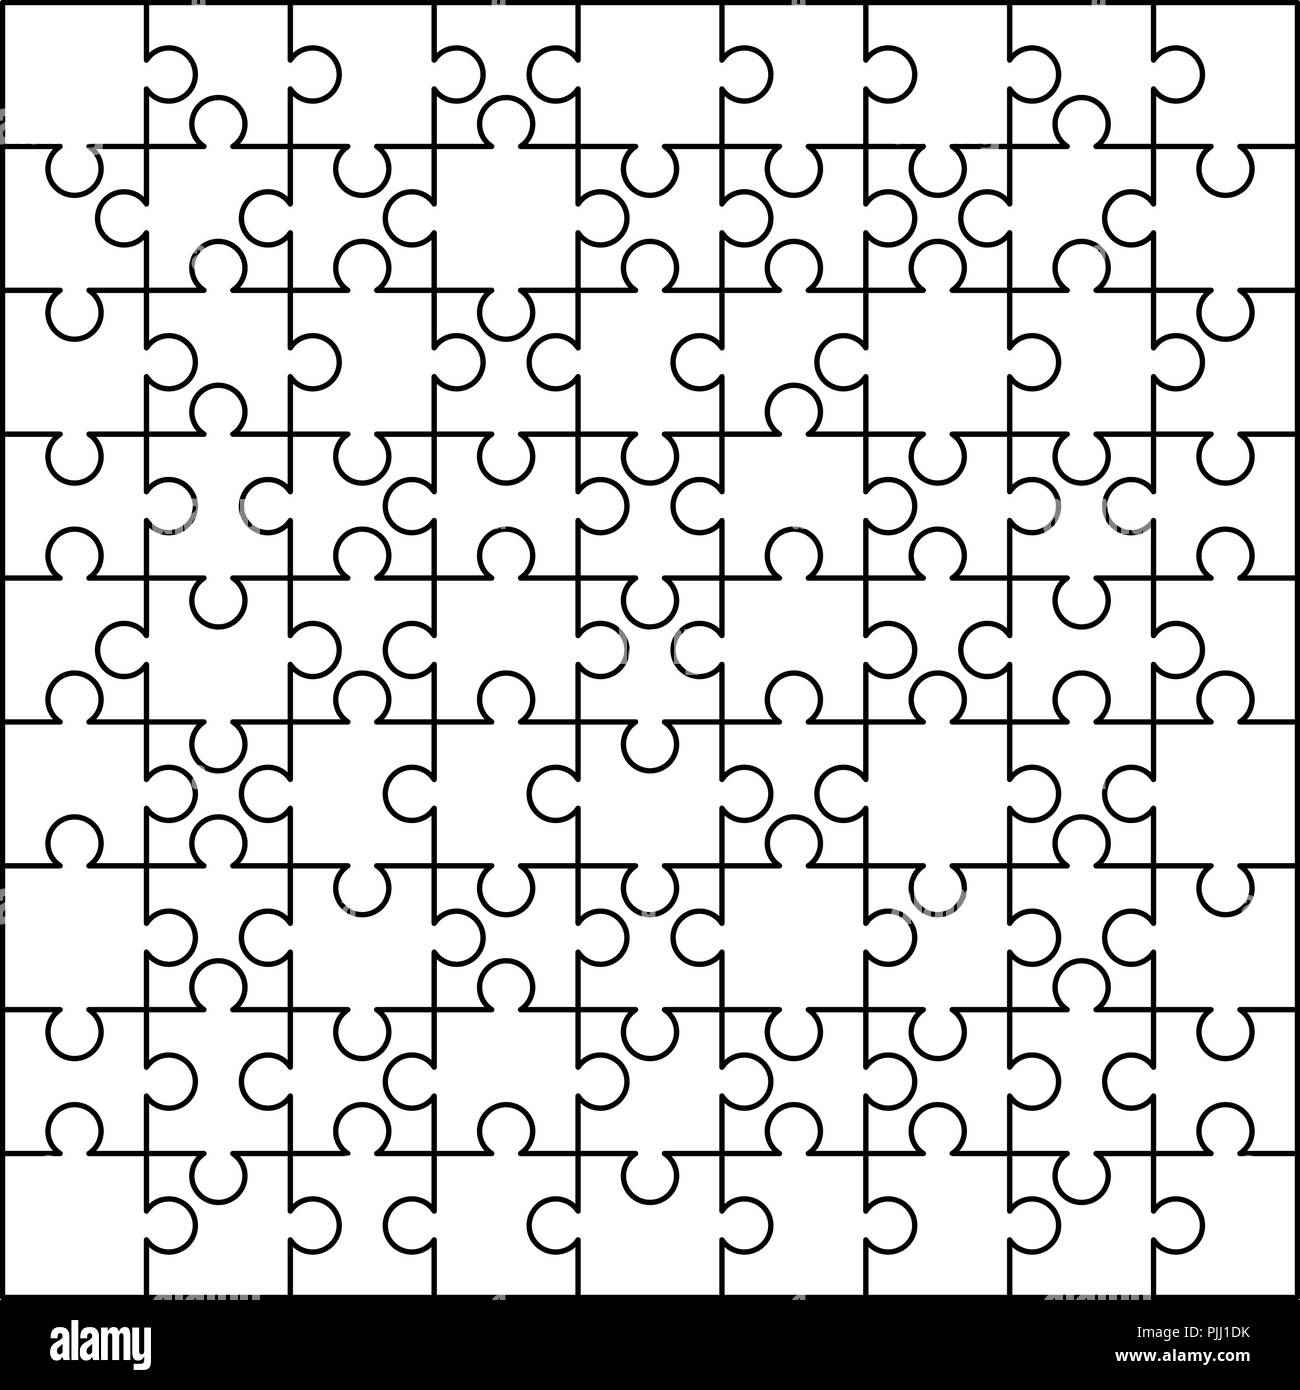 100 Piece Puzzles For Kids